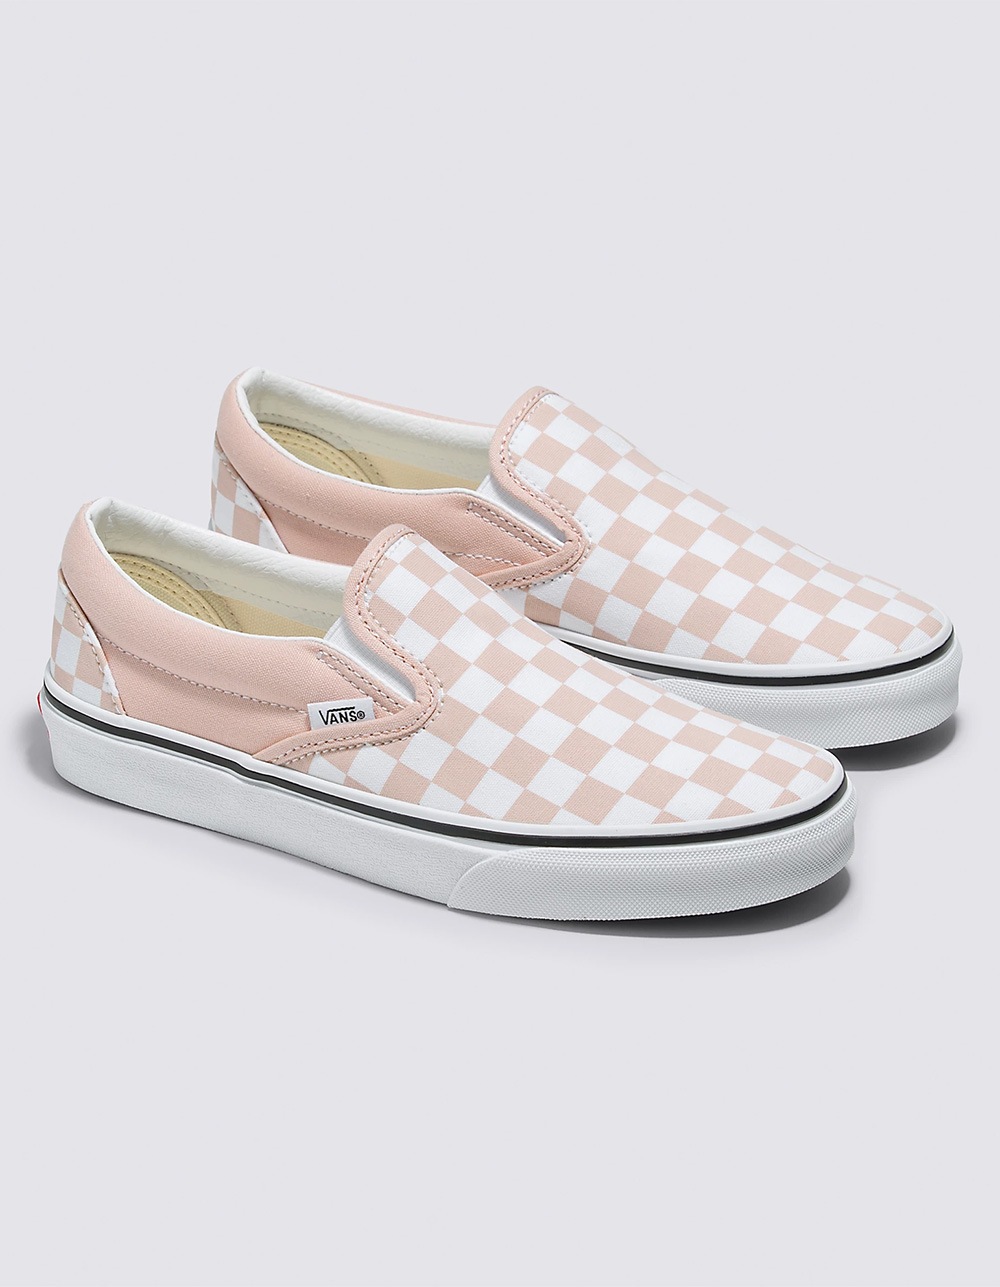 pad begrijpen domein VANS Checkerboard Classic Womens Slip-On Shoes - ROSE | Tillys